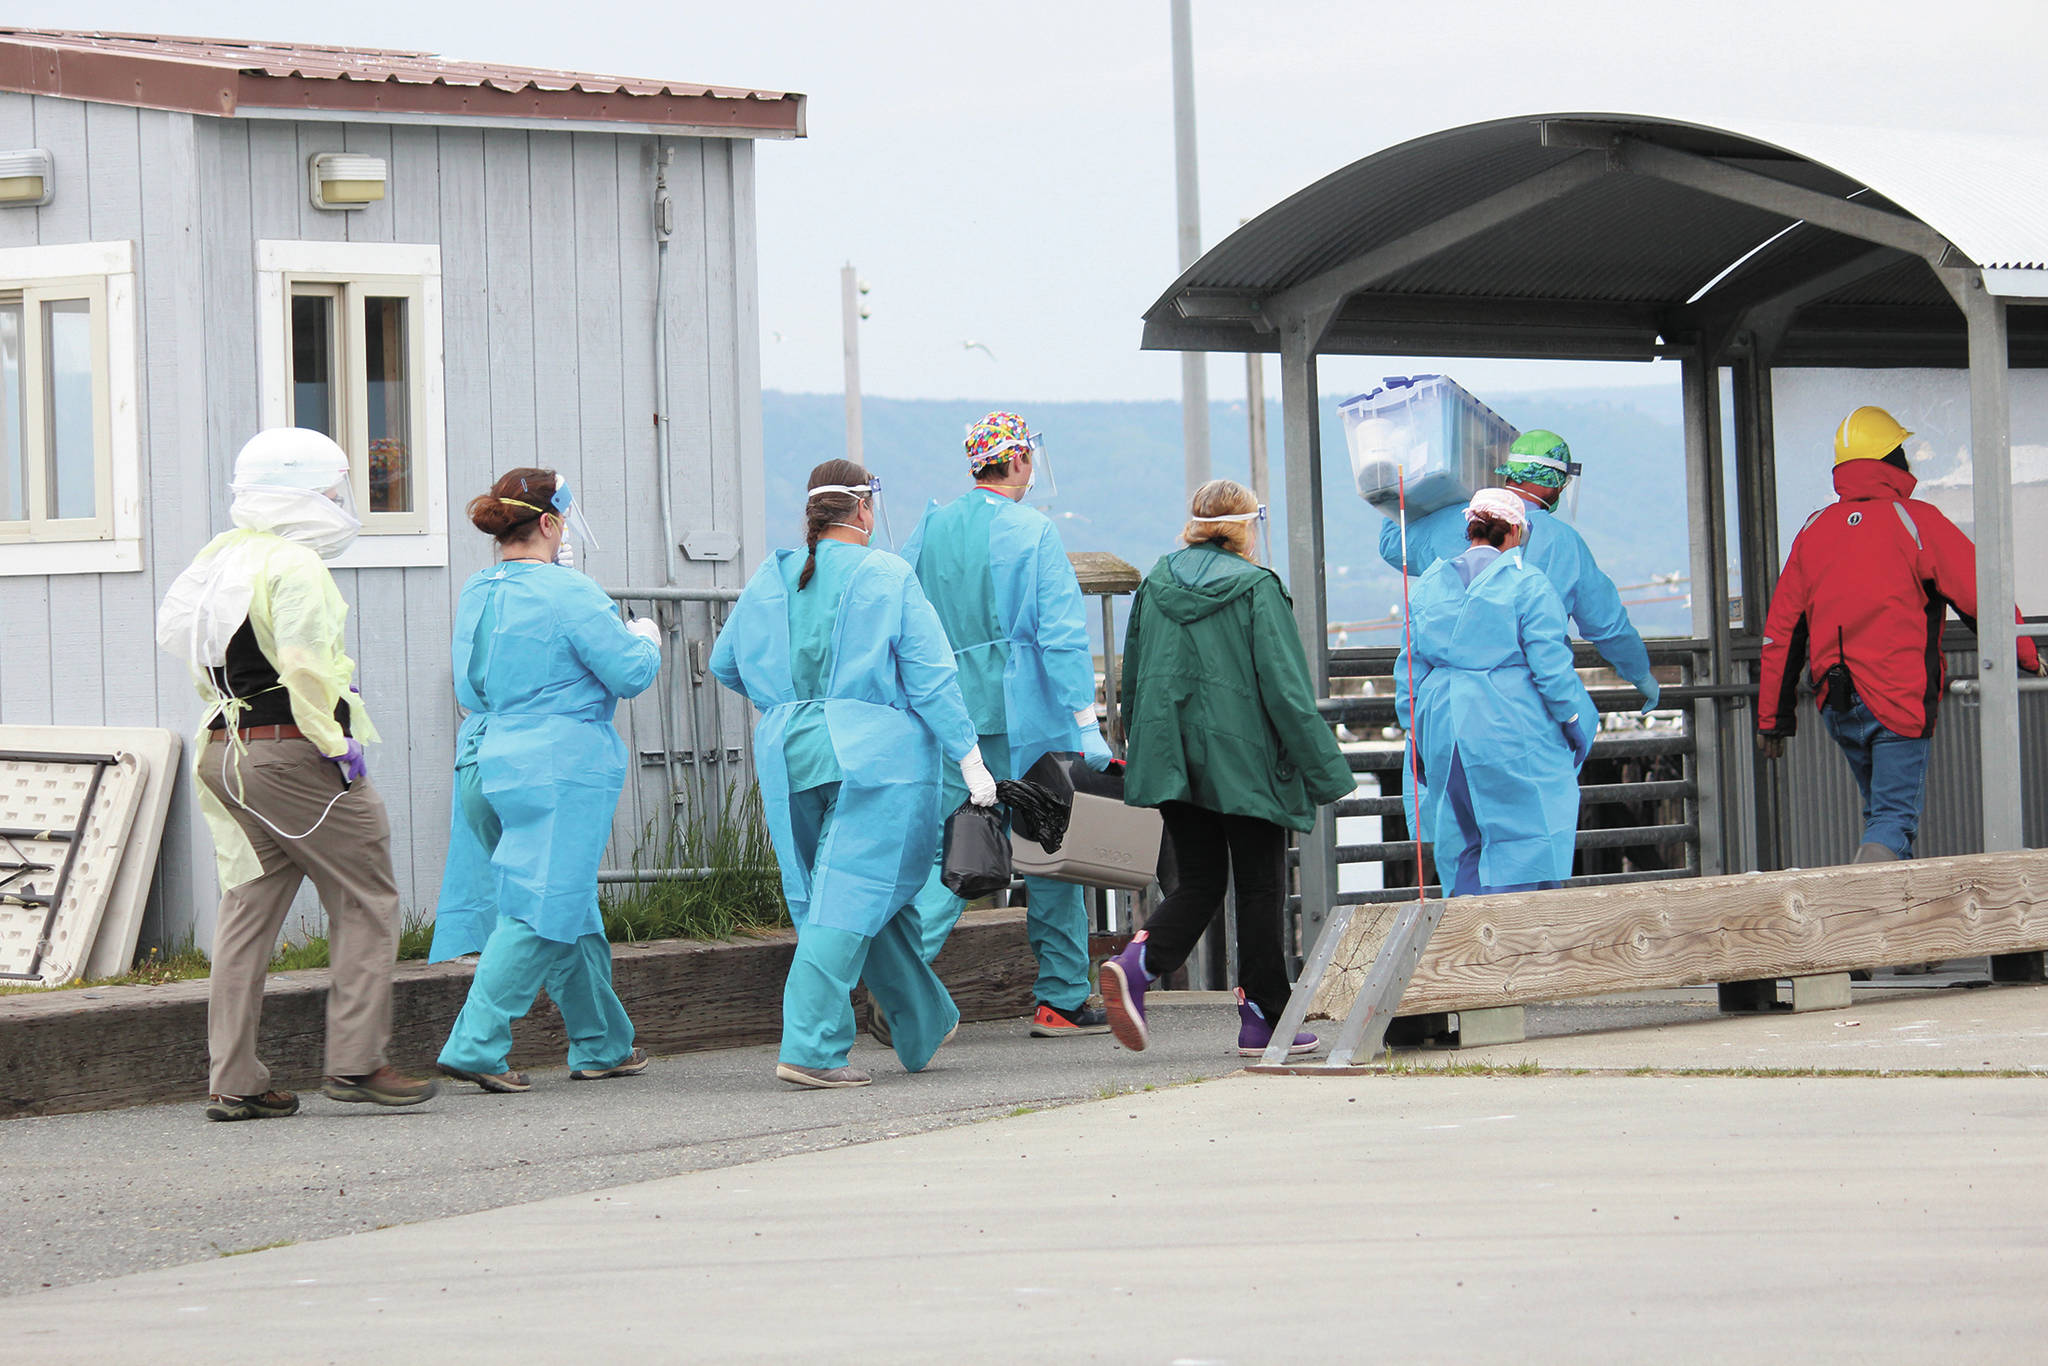 Staff from South Peninsula Hospital and Homer Public Health prepare to board the M/V Tustumena to test 35 crew and six passengers after it docked at the Homer Ferry Terminal on Monday, June 8, 2020 in Homer, Alaska. The ship carried one crew member who tested positive for COVID-19 on Saturday in Dutch Harbor. Health workers tested people on board the ship when it arrived, and crew and passengers were only allowed to disembark if they had private transportation to their final quarantine destination. (Photo by Megan Pacer/Homer News)